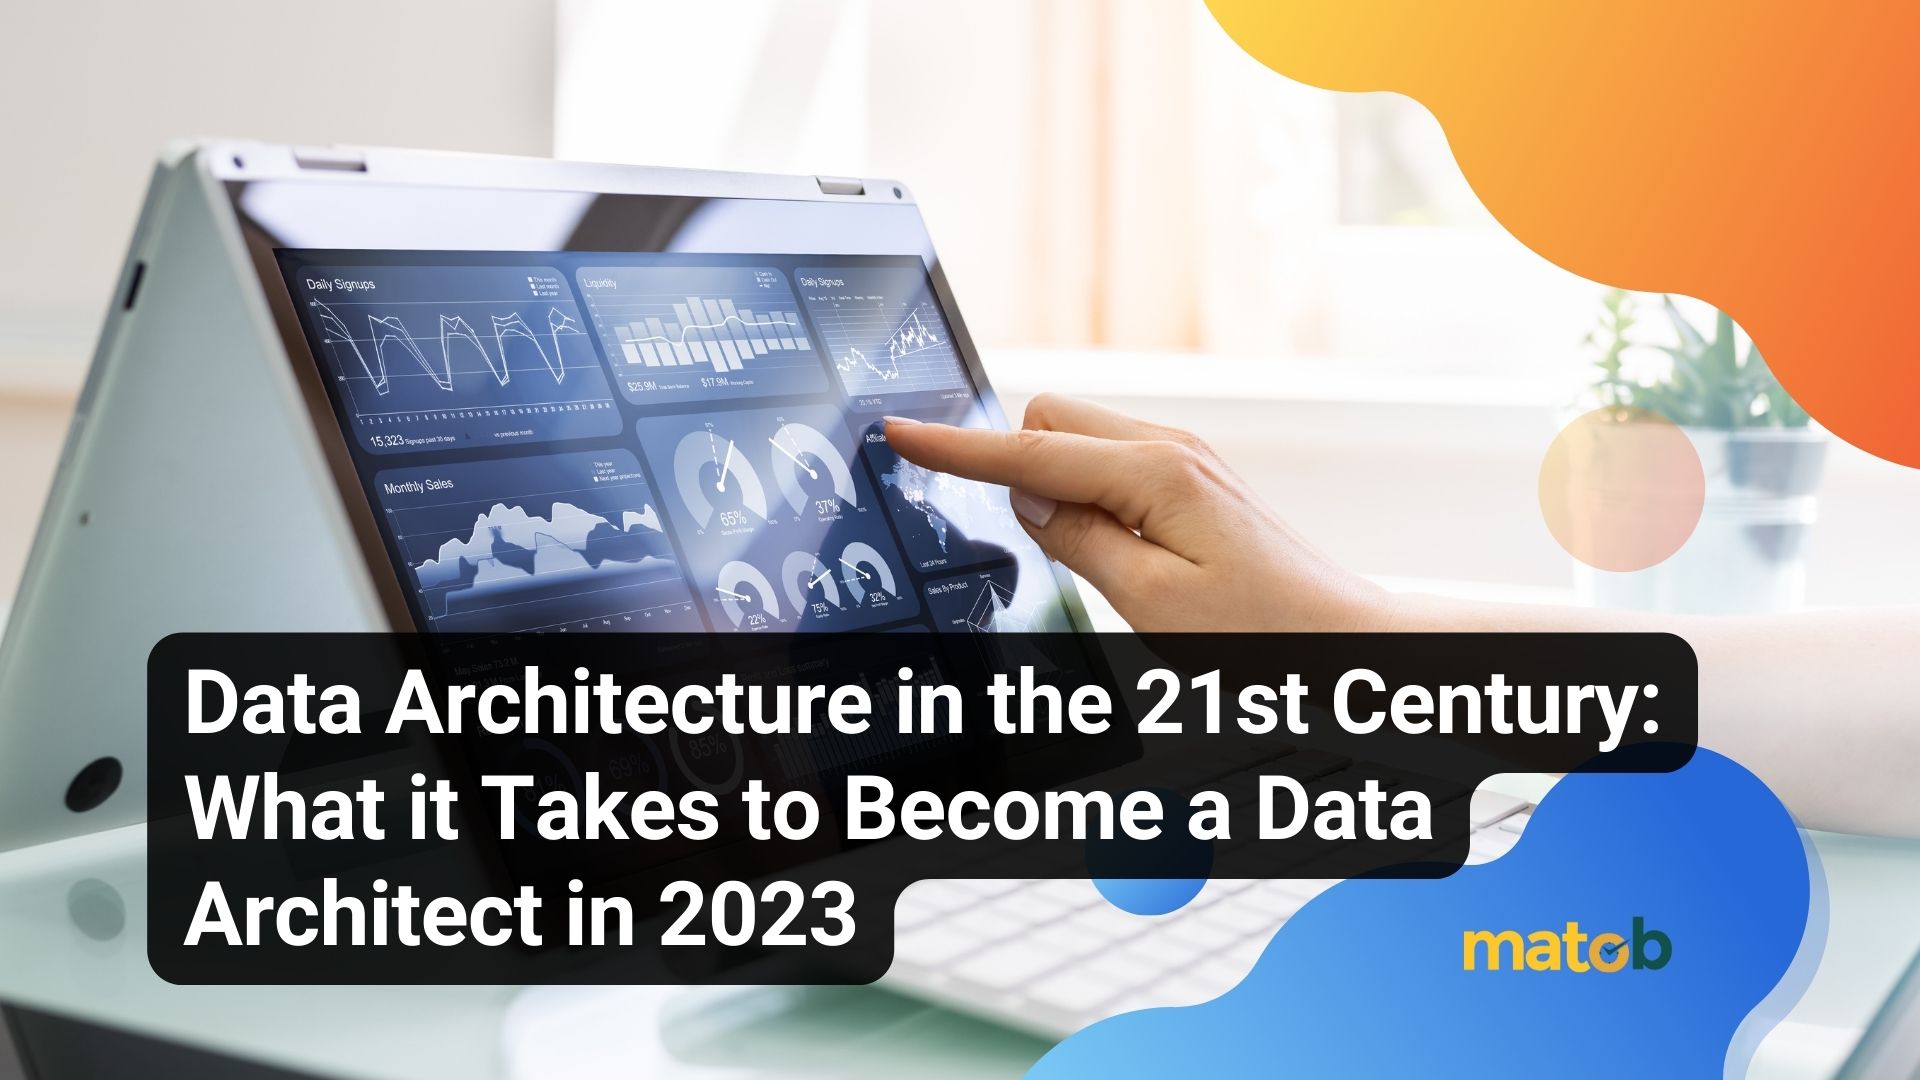 Data Architecture in the 21st Century: What it Takes to Become a Data Architect in 2023